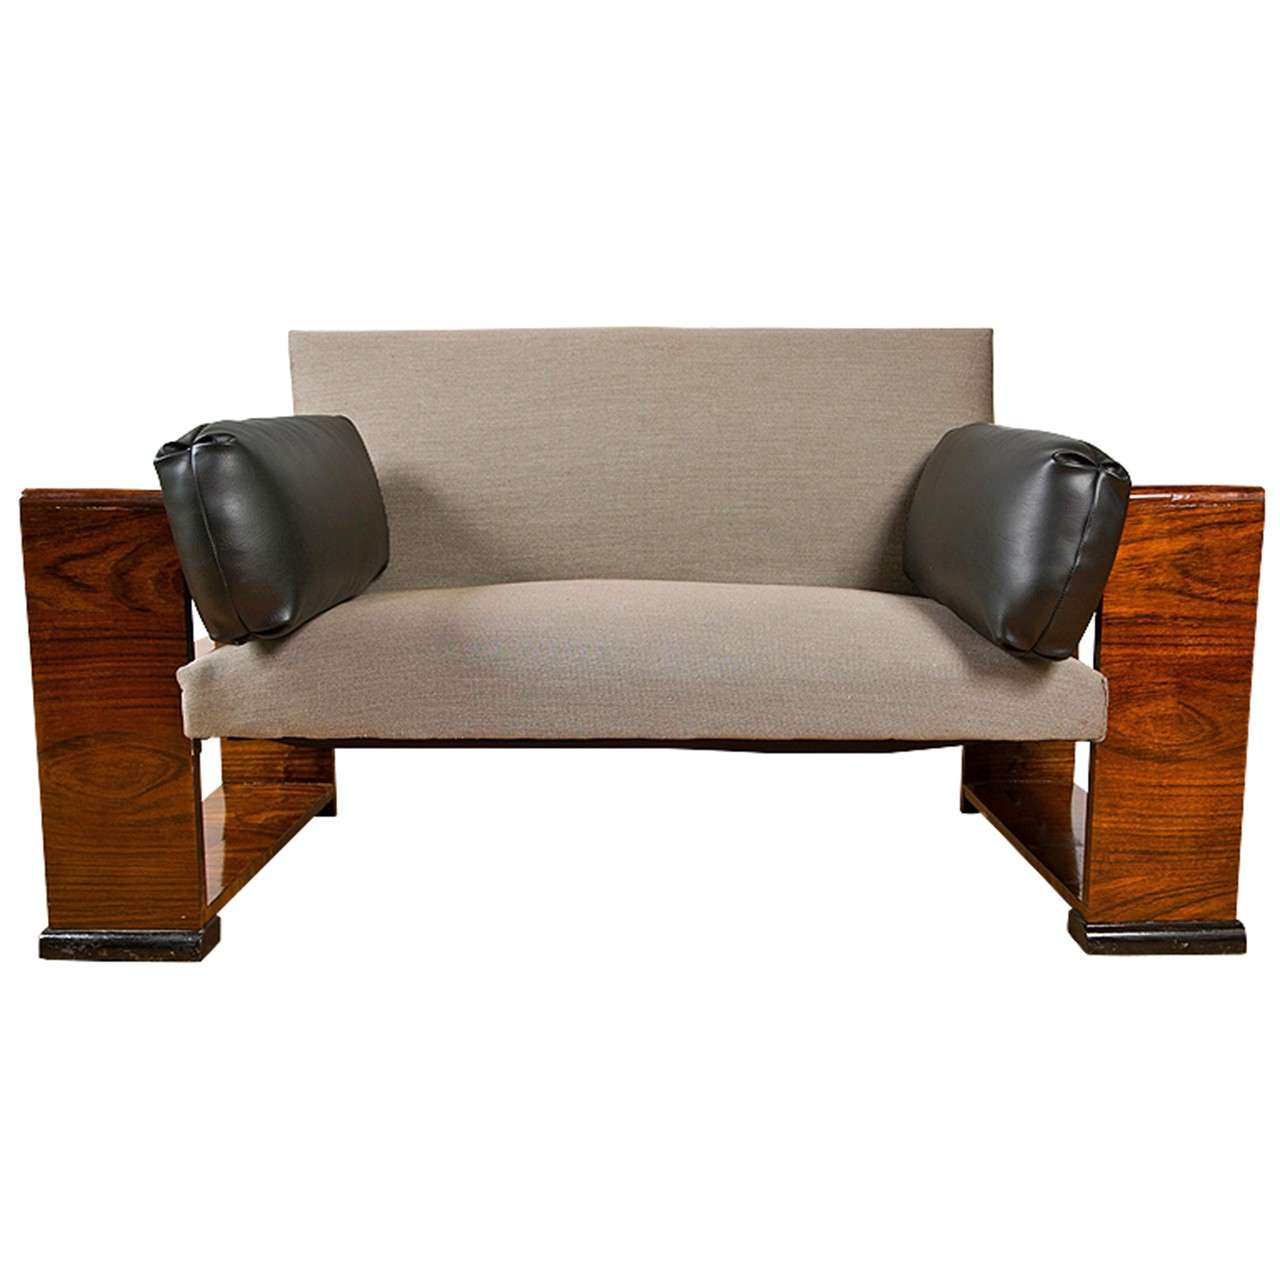 French Art Deco Style Settee With End Tables For Sale